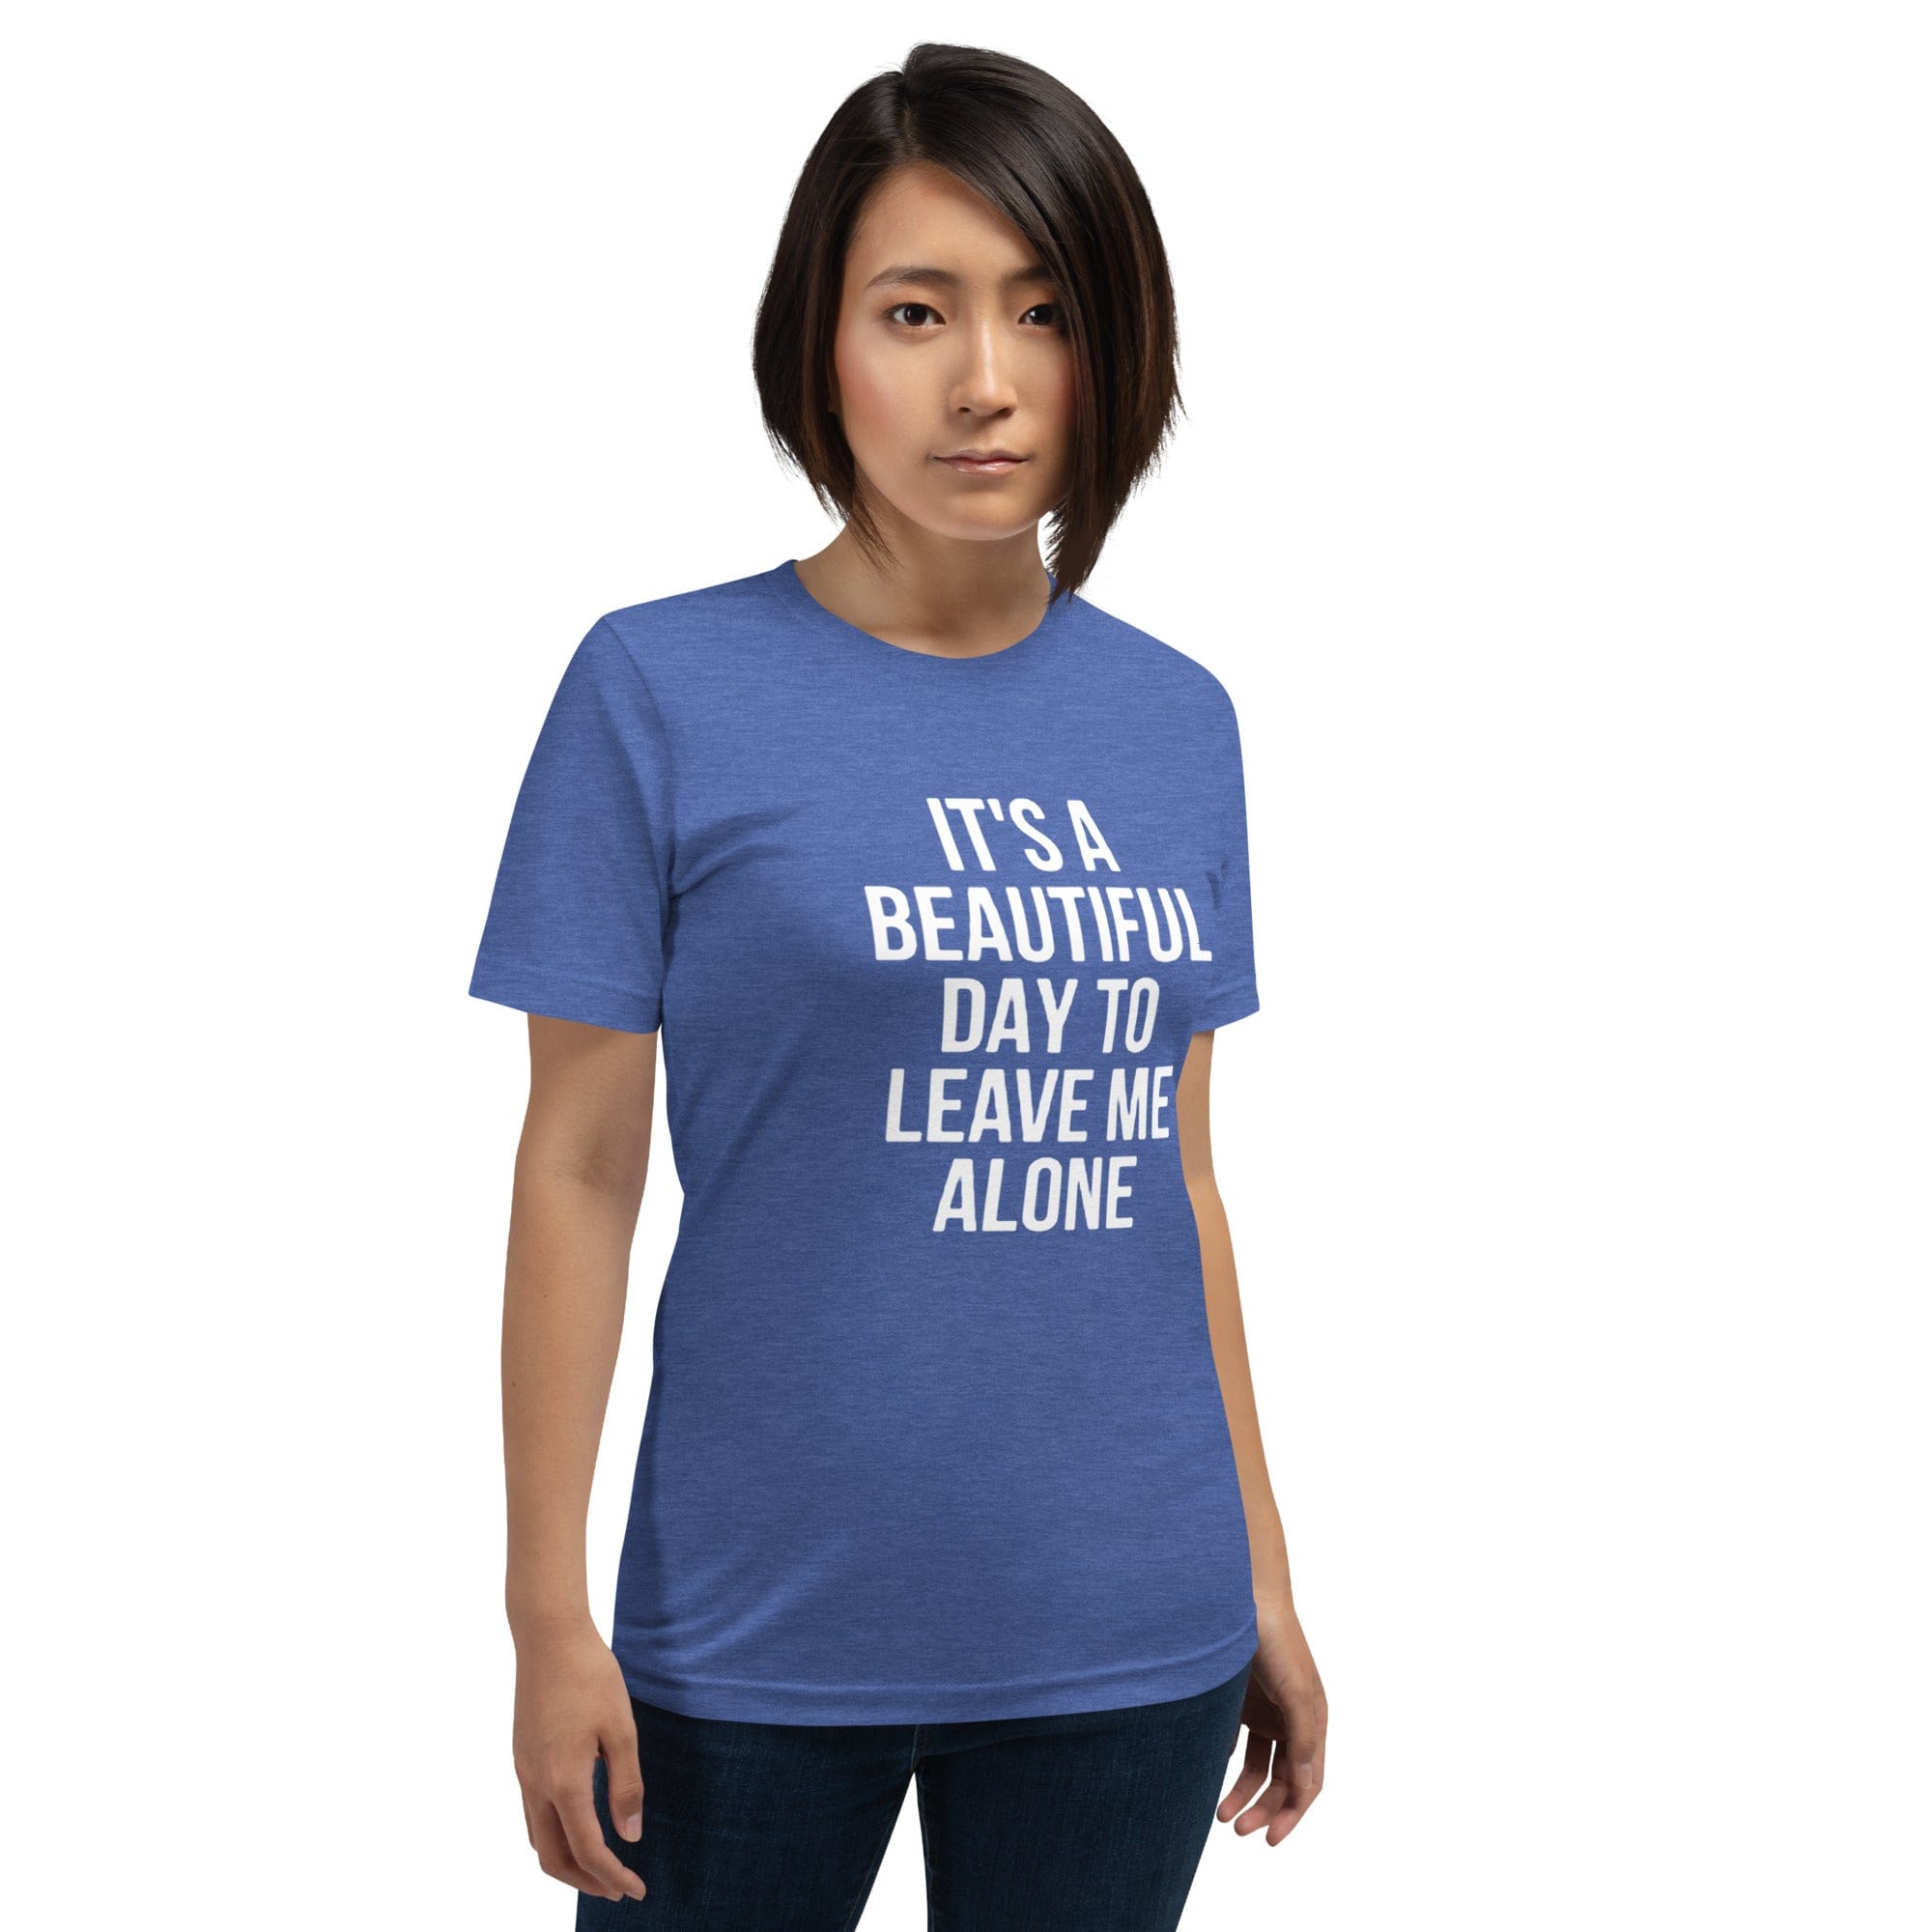 Absolutestacker2 Heather True Royal / S It's a beautiful day